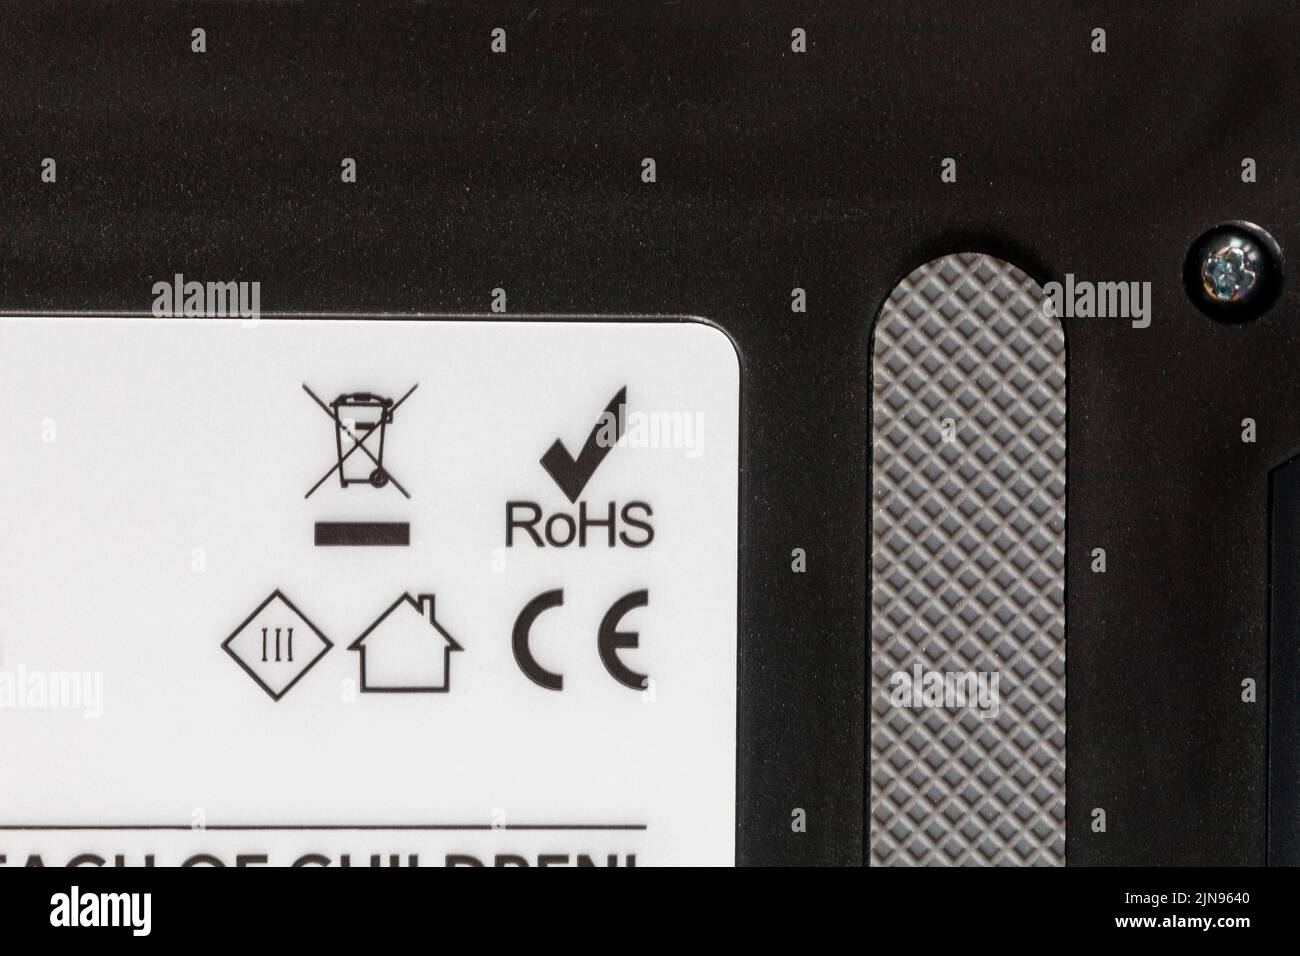 ROHS Restriction of Hazardous Substances, CE symbol logo and recycling information on robotic vacuum cleaner Stock Photo